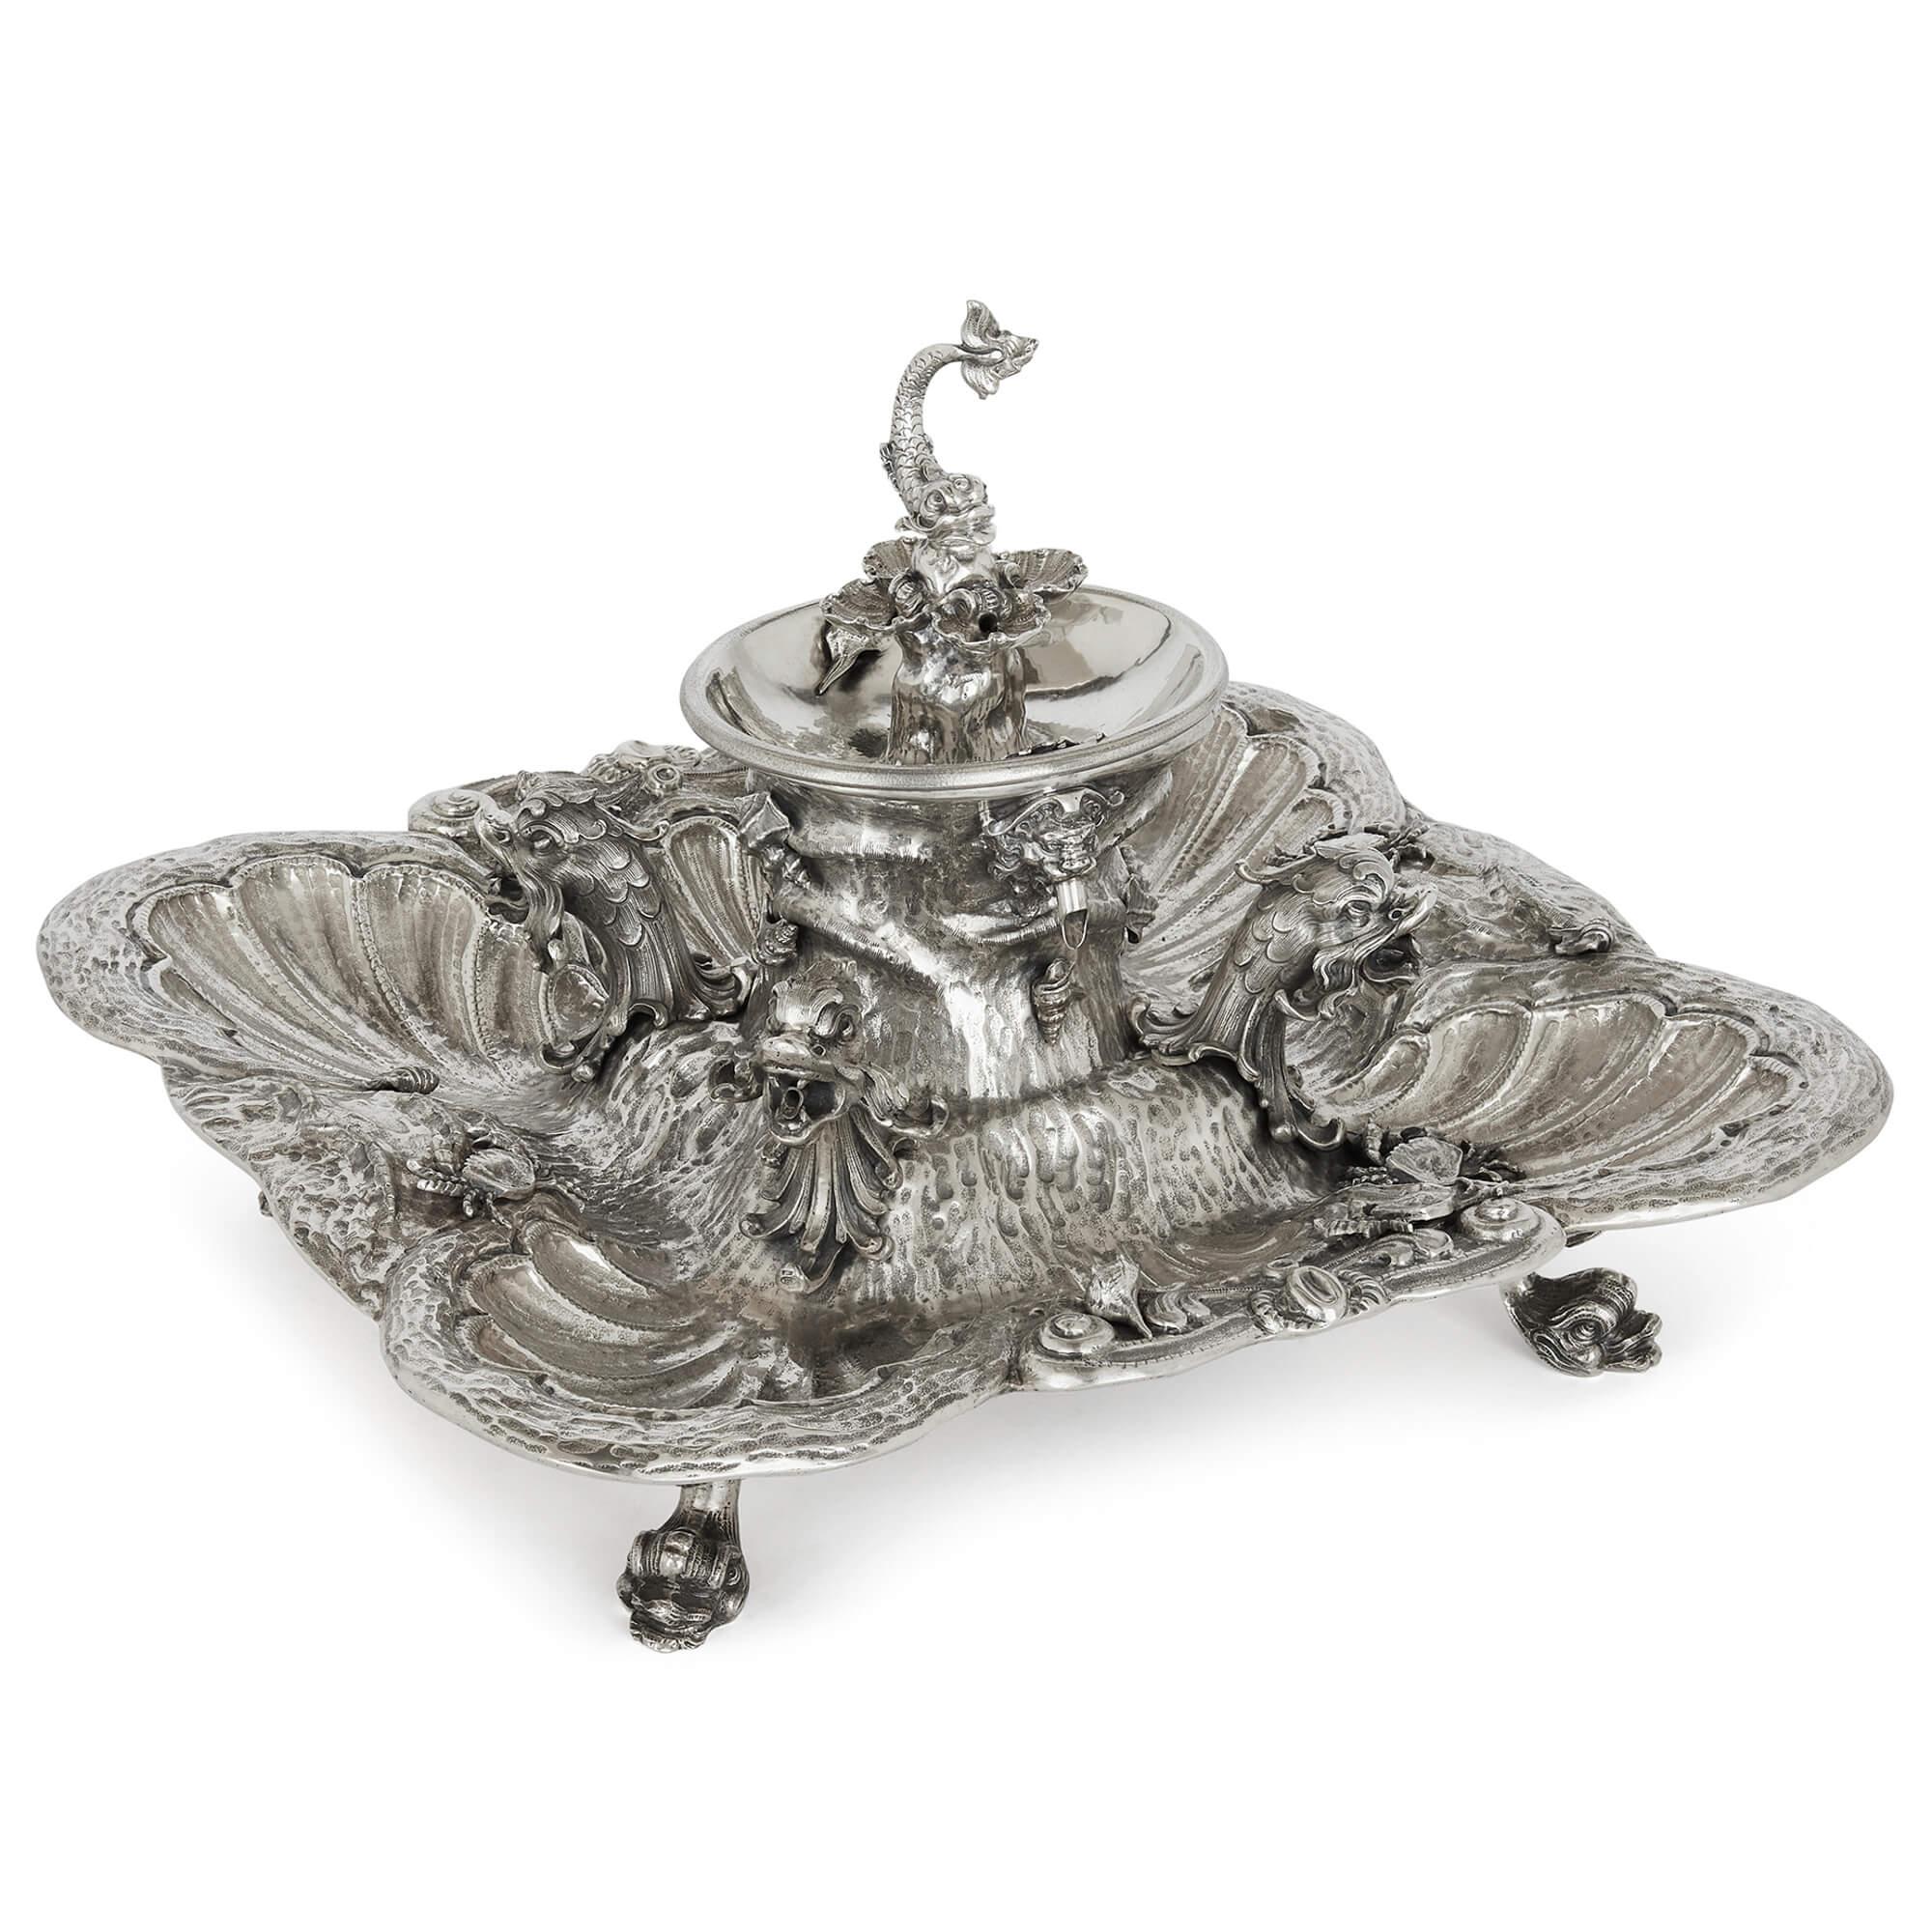 A Milanese sterling silver 20th century fountain centrepiece
Measures: Height: 33cm, width: 47cm, depth: 42cm.

This stunning centrepiece is an Italian sterling silver fountain, made in Milan in the twentieth century. The piece, set on